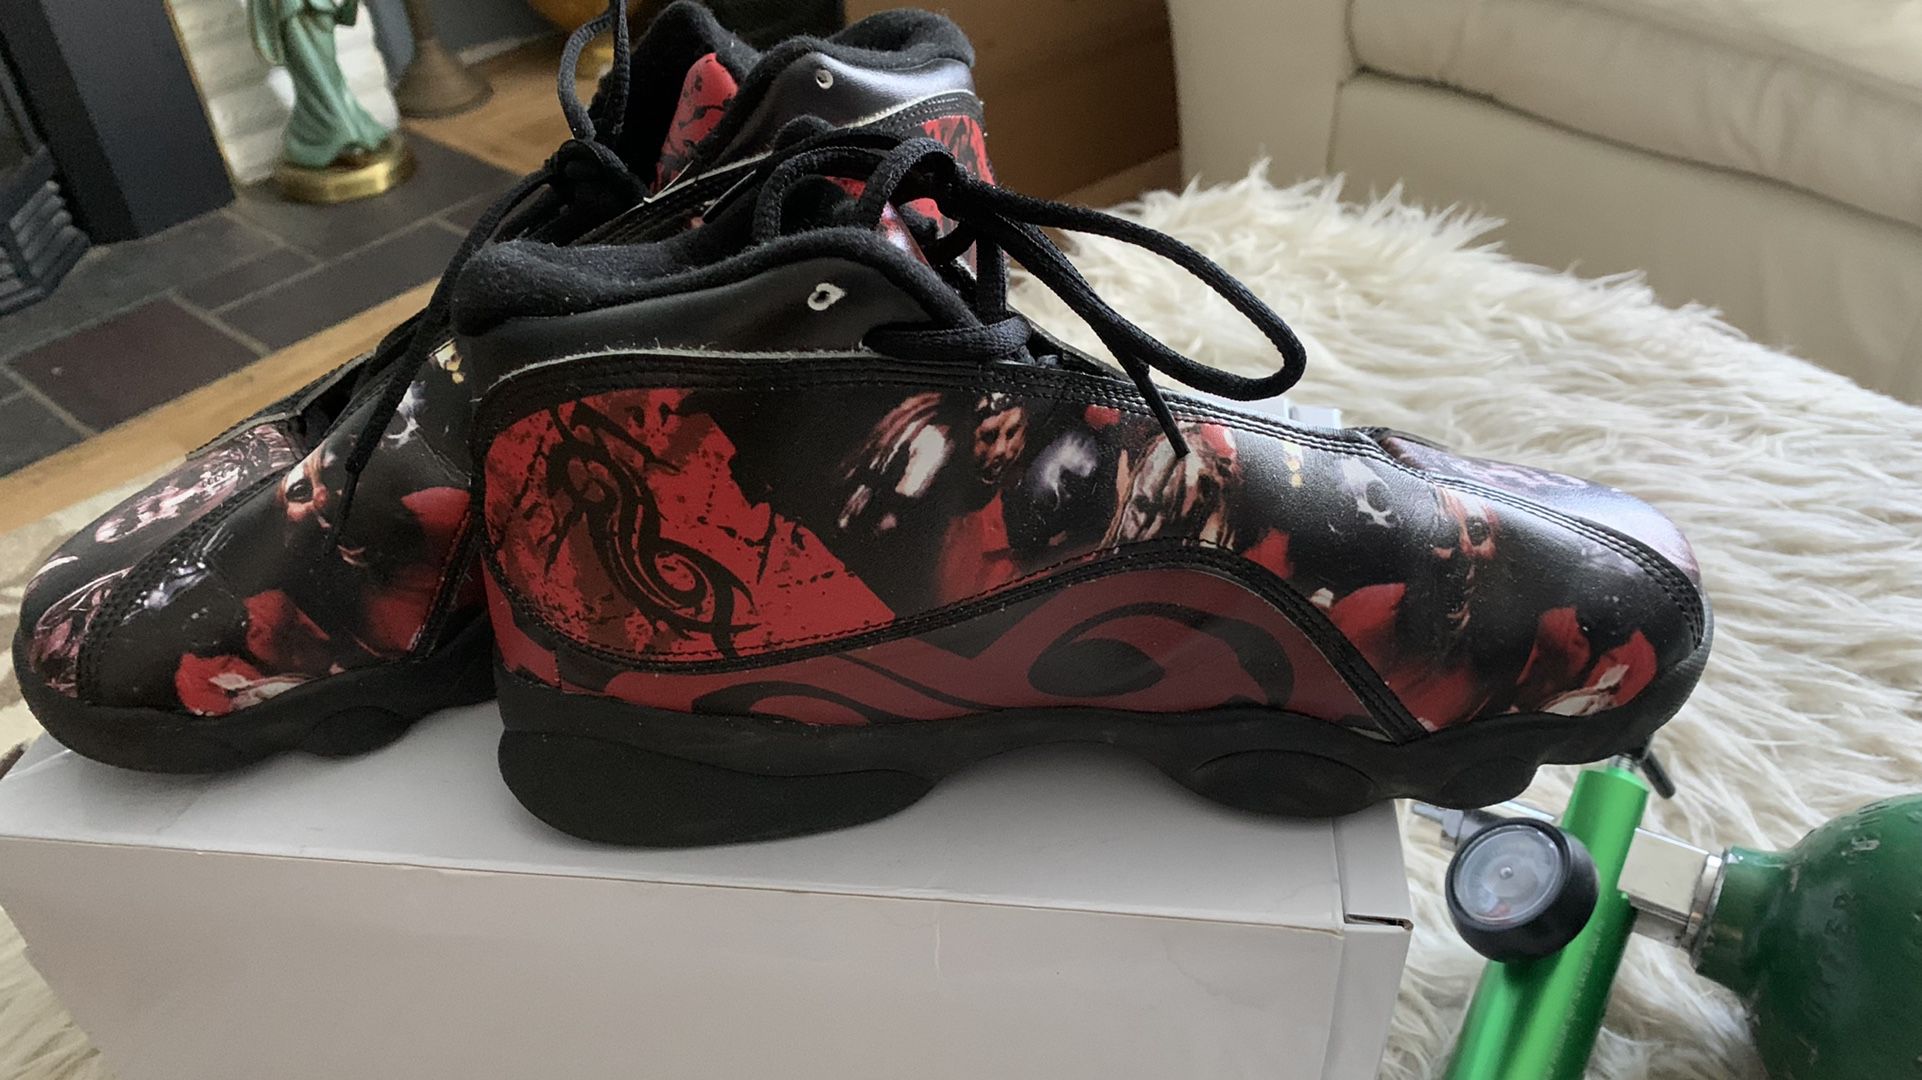 Strength training basketball Shoes Size 13 for Sale in Tacoma, WA - OfferUp